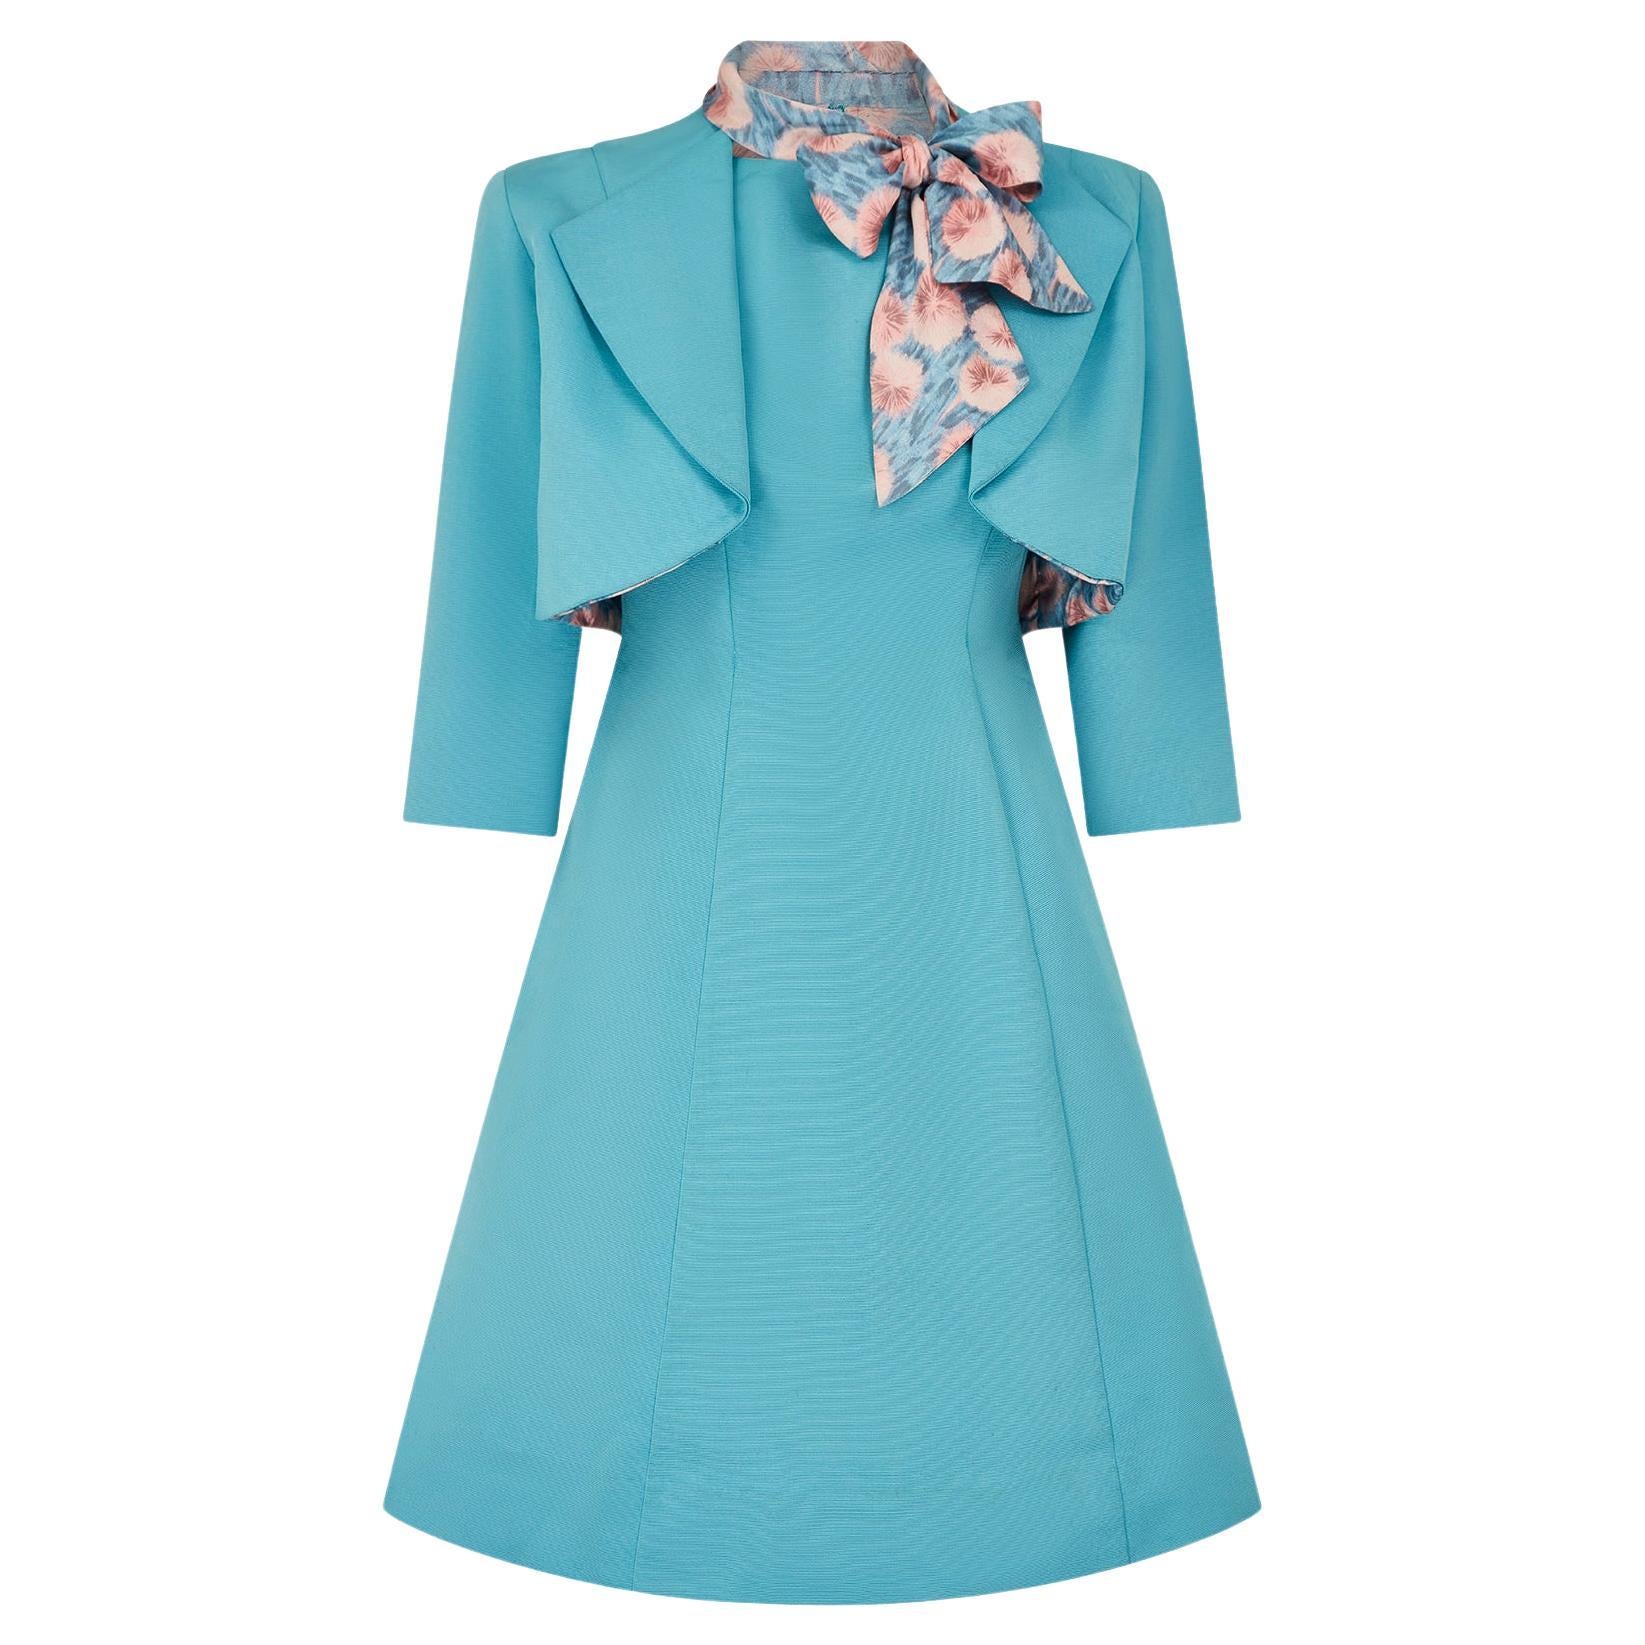 1960s Silk Faille Turquoise A Line Dress Suit with Jacket